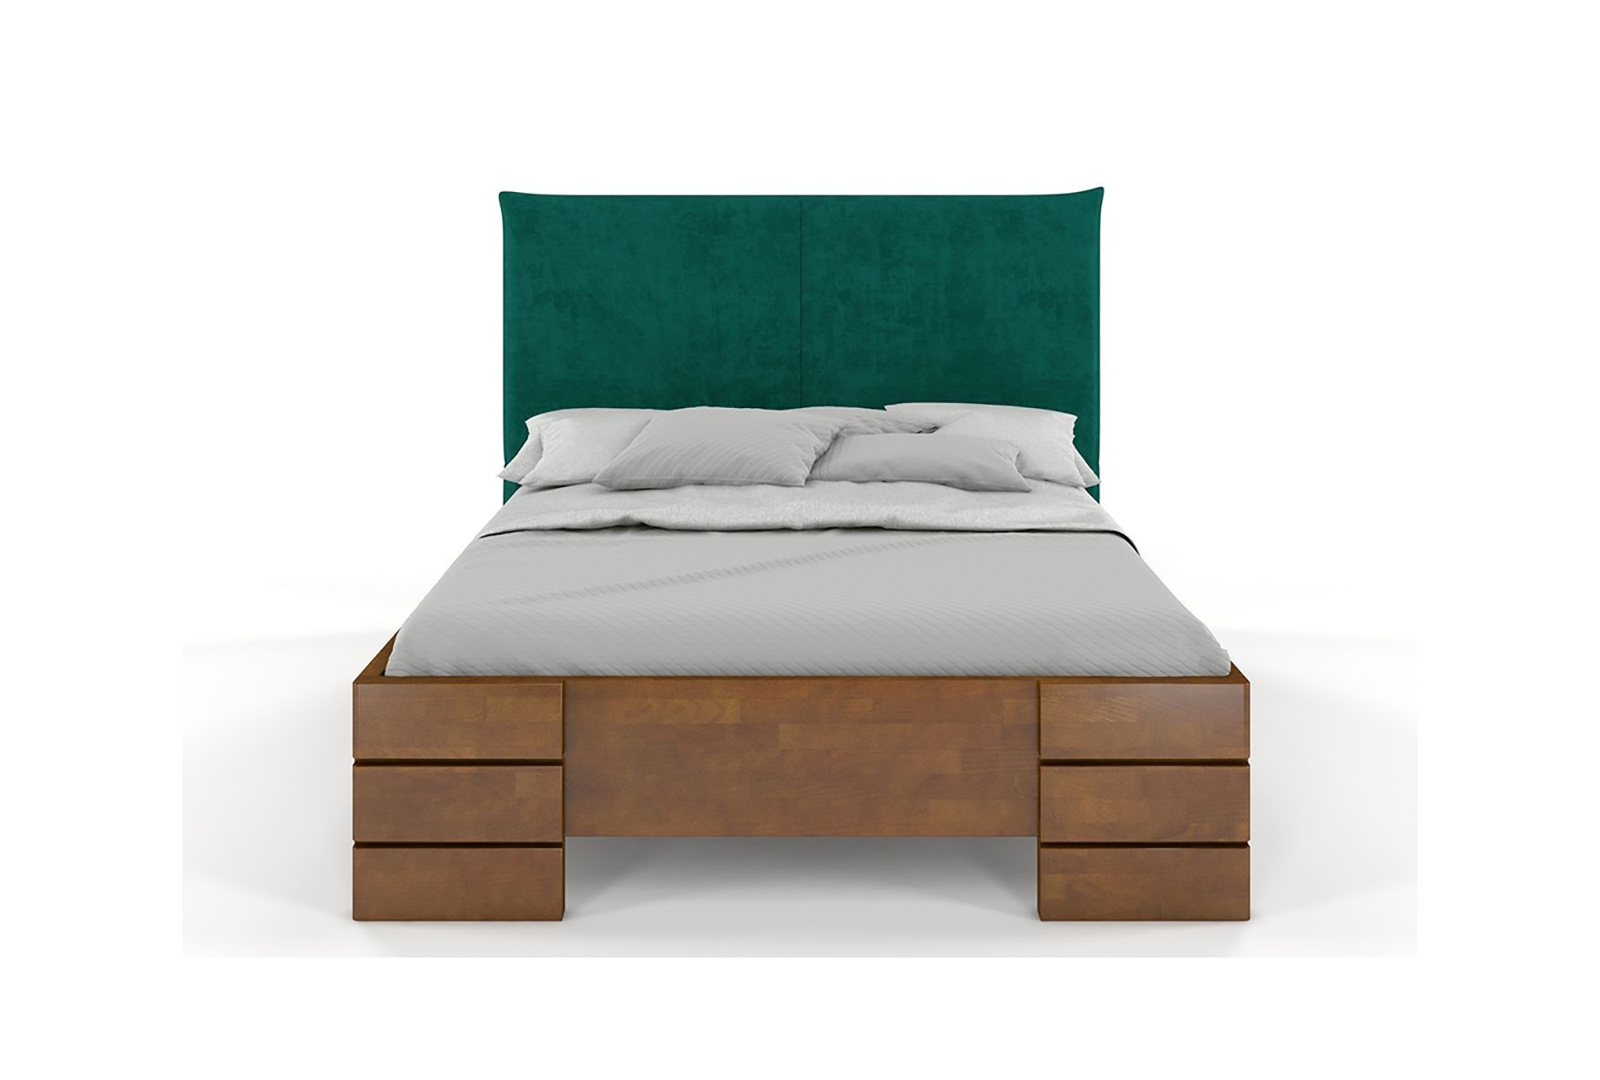 VISBY SANTAP WOODEN BEECH BED WITH AN UPHOLSTERED HEADBOARD